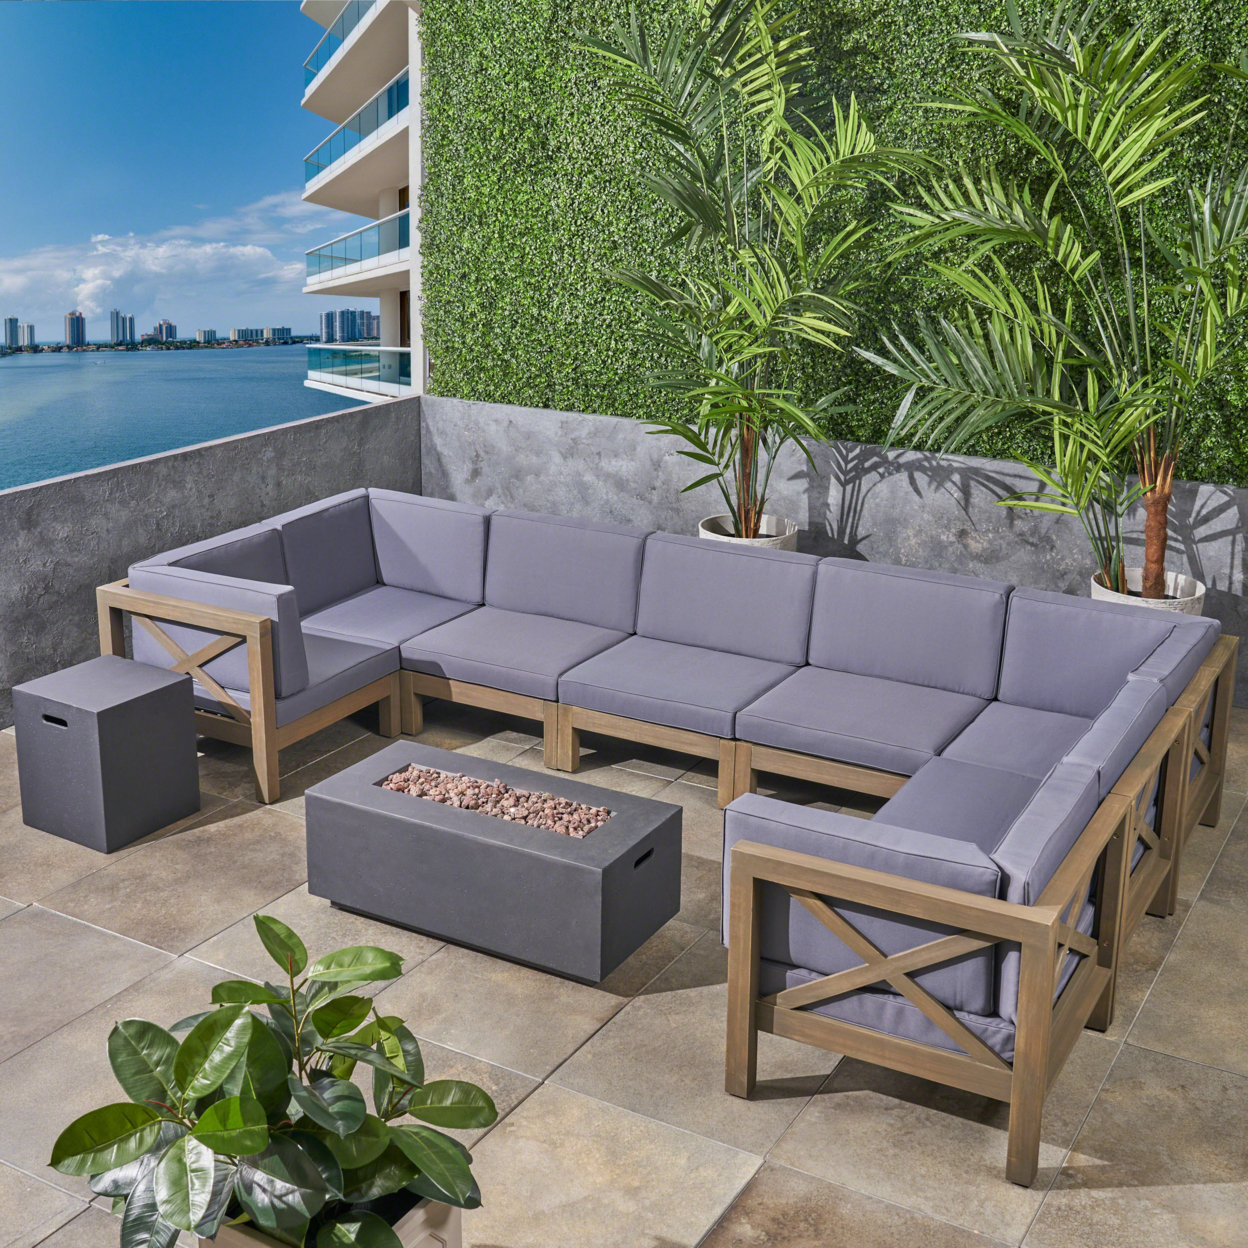 Cytheria Outdoor Acacia Wood 8 Seater U-Shaped Sectional Sofa Set With Fire Pit - Gray / Dark Gray